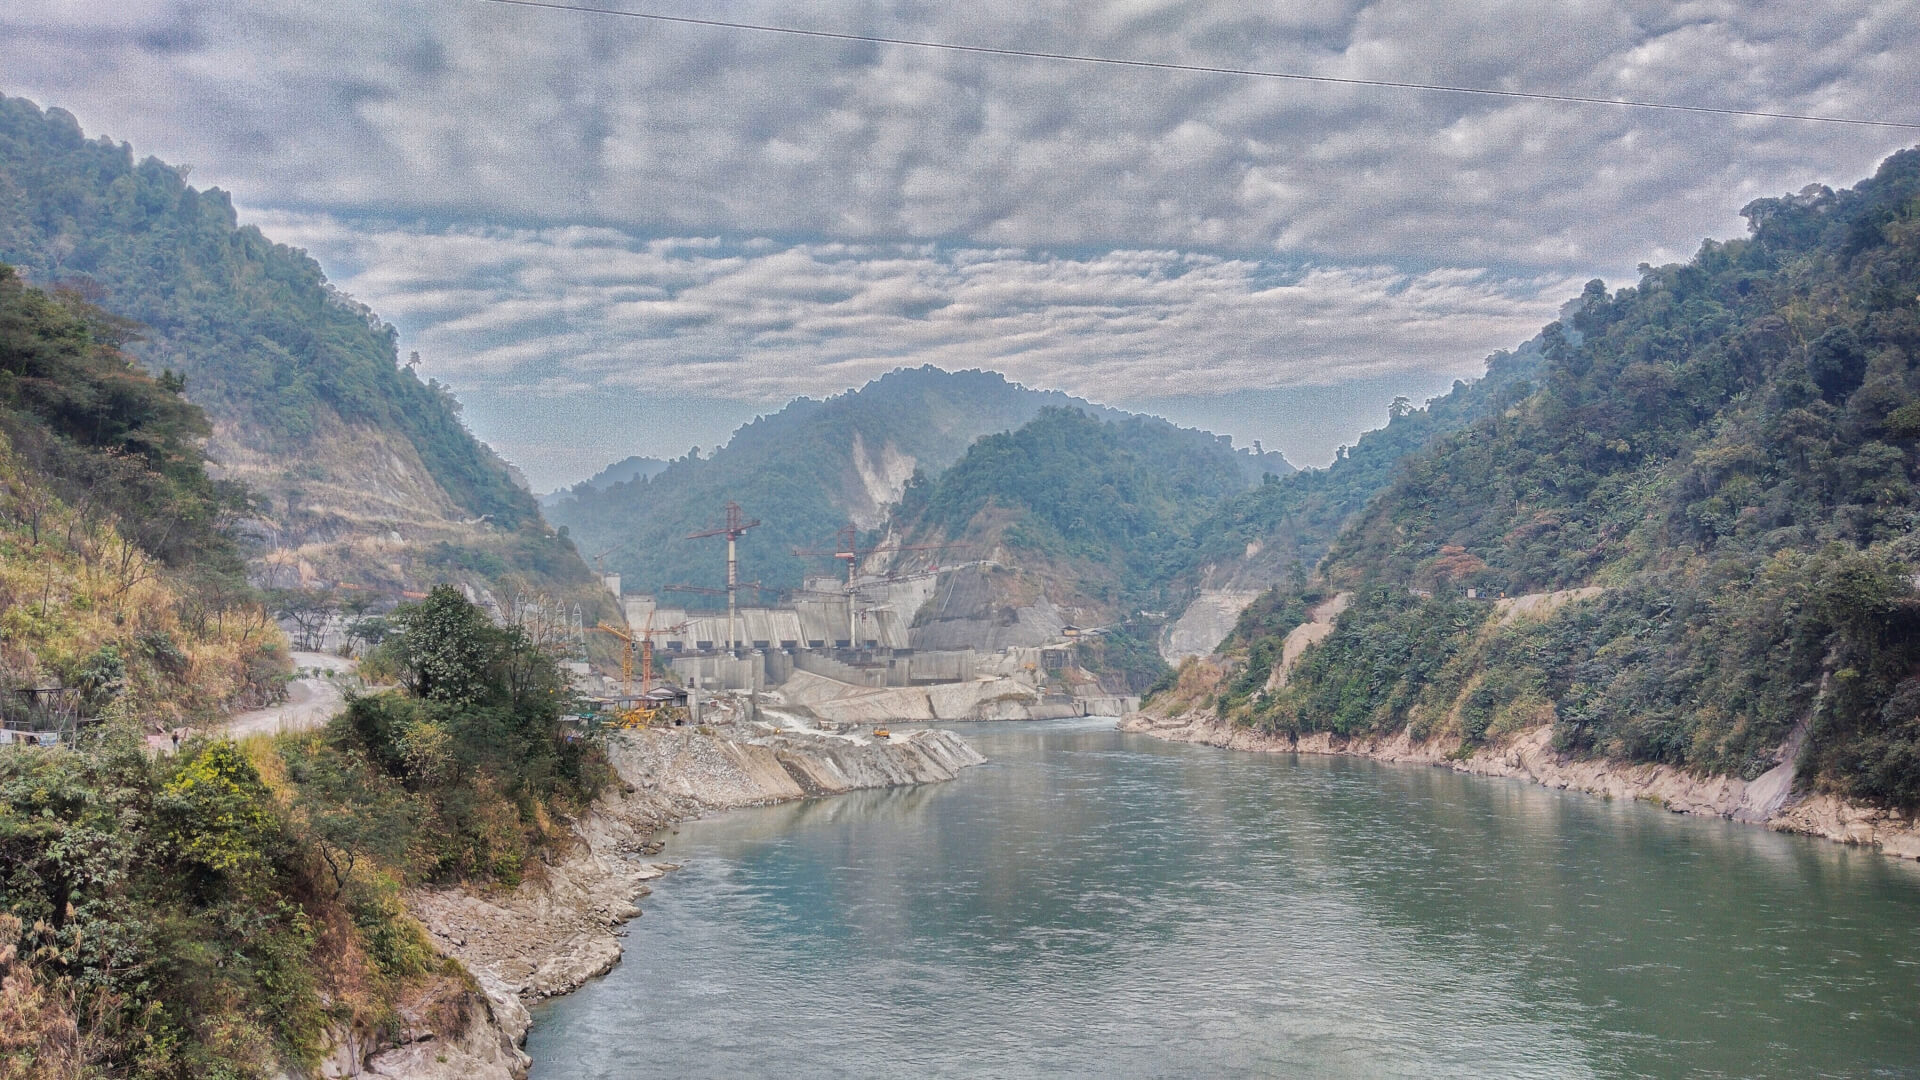 India’s Largest Hydropower Project Set to Start Near China Border After 20 Year Delay